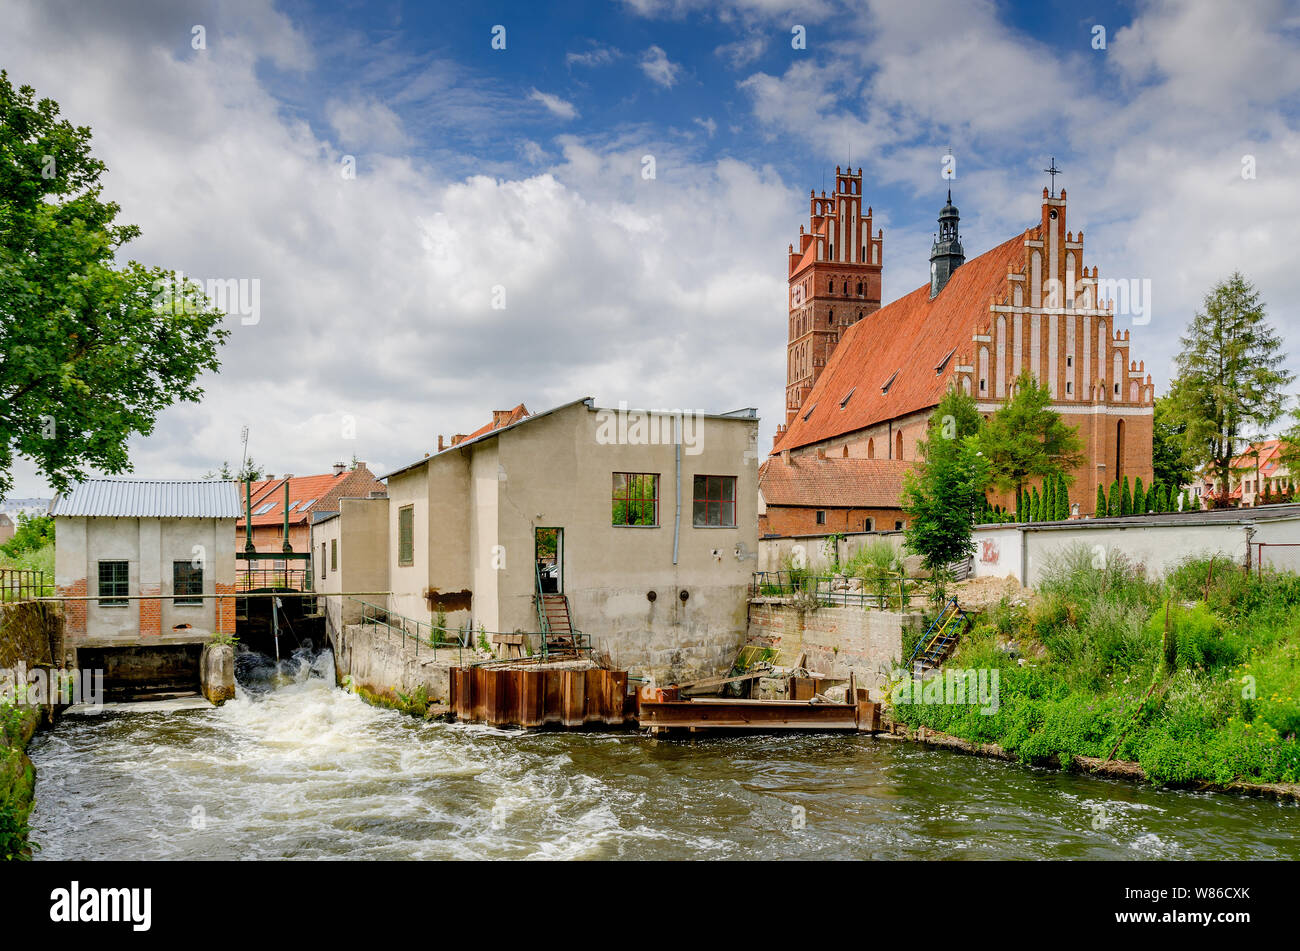 Dobre Miasto, ger. Guttstadt, warmian-mazurian province, Poland.  Small hydroelectric power plant. In the background - 14th cent.  collegiate church. Stock Photo